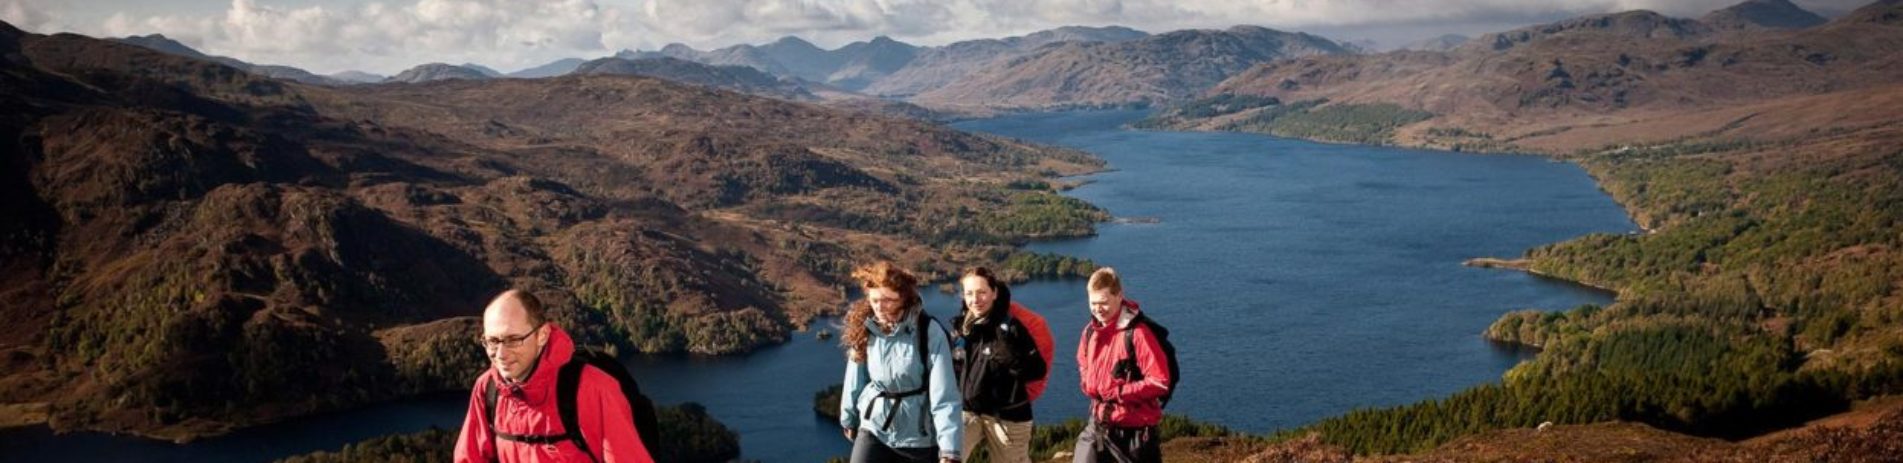 group-of-two-men-and-two-women-climbing-to-the-summit-of-ben-aan-with-loch-katrine-and-trossachs-mountains-in-the-background